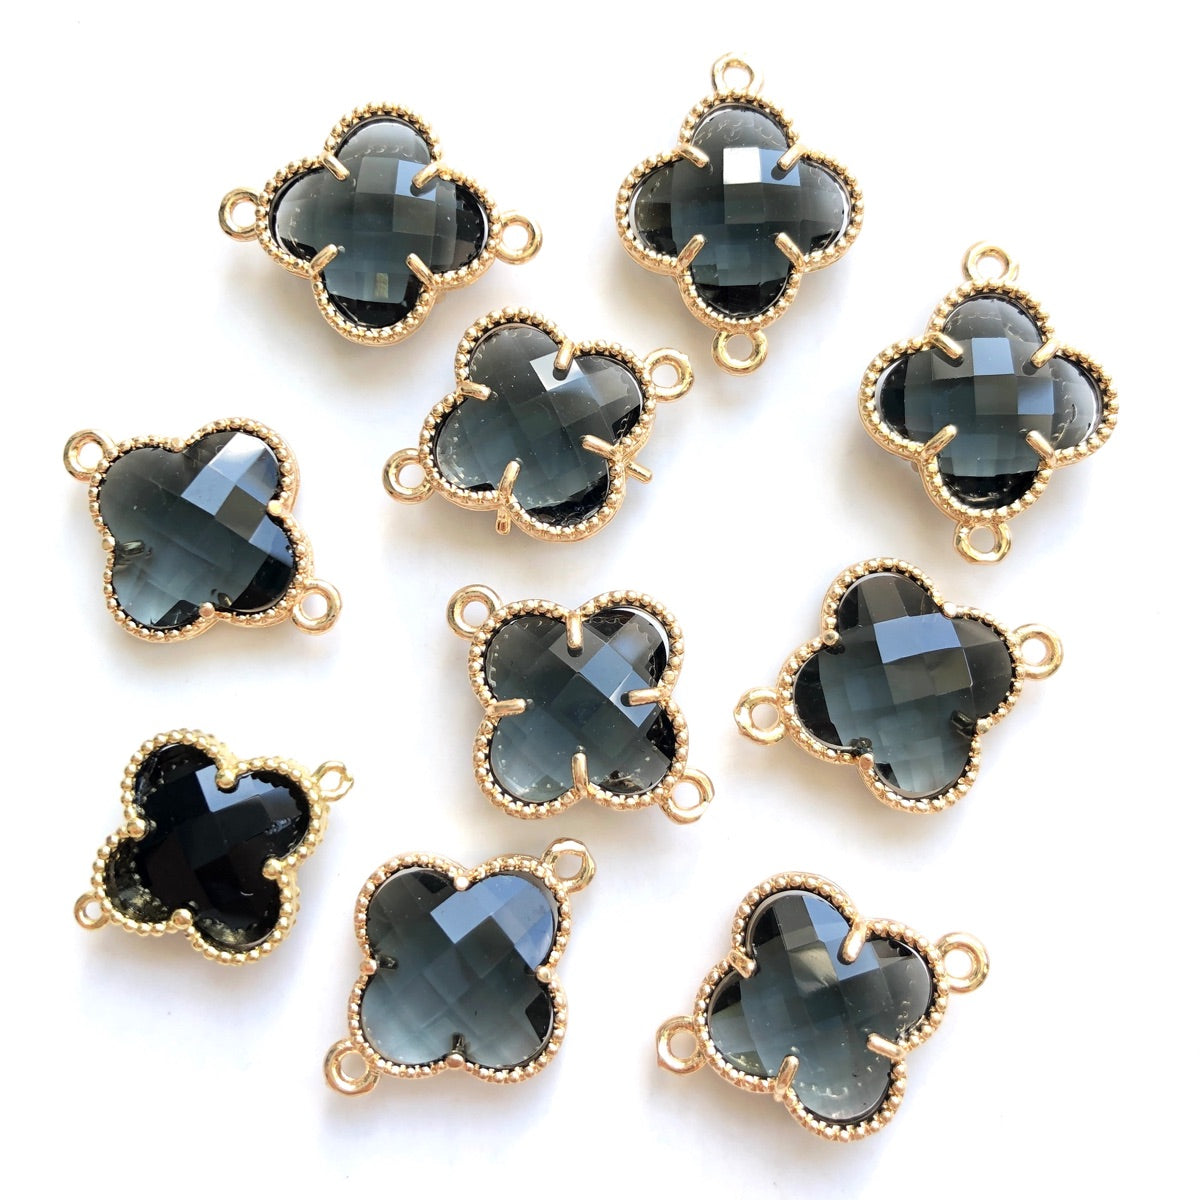 10pcs/Lot Gold Plated Glass Crystal Clover Flower Connectors Clear Black Stone Charms Flower Glass Beads New Charms Arrivals Charms Beads Beyond